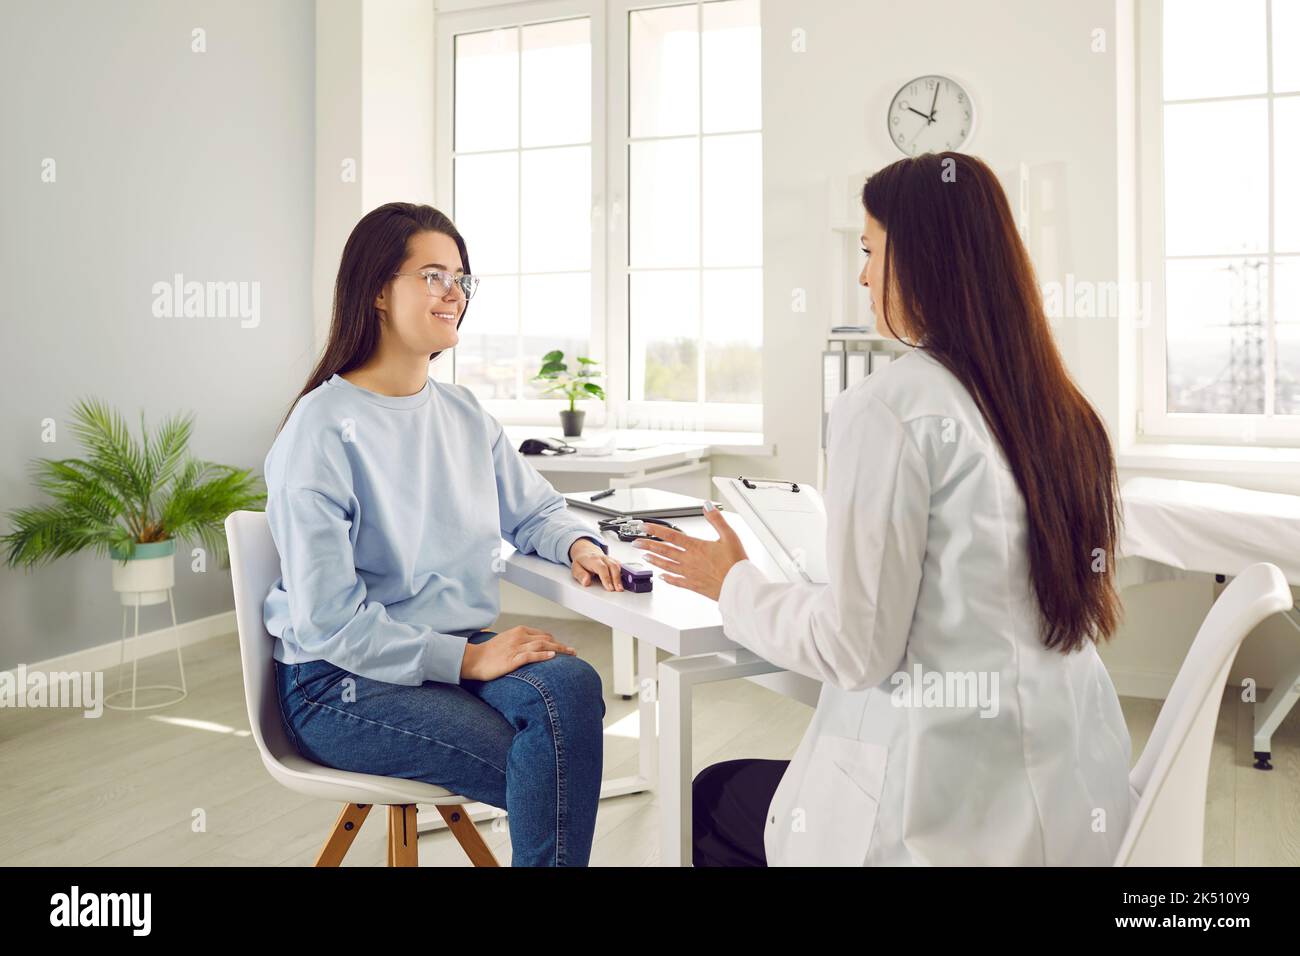 Satisfied female patient uses pulse oximeter while talking to doctor at hospital appointment. Stock Photo